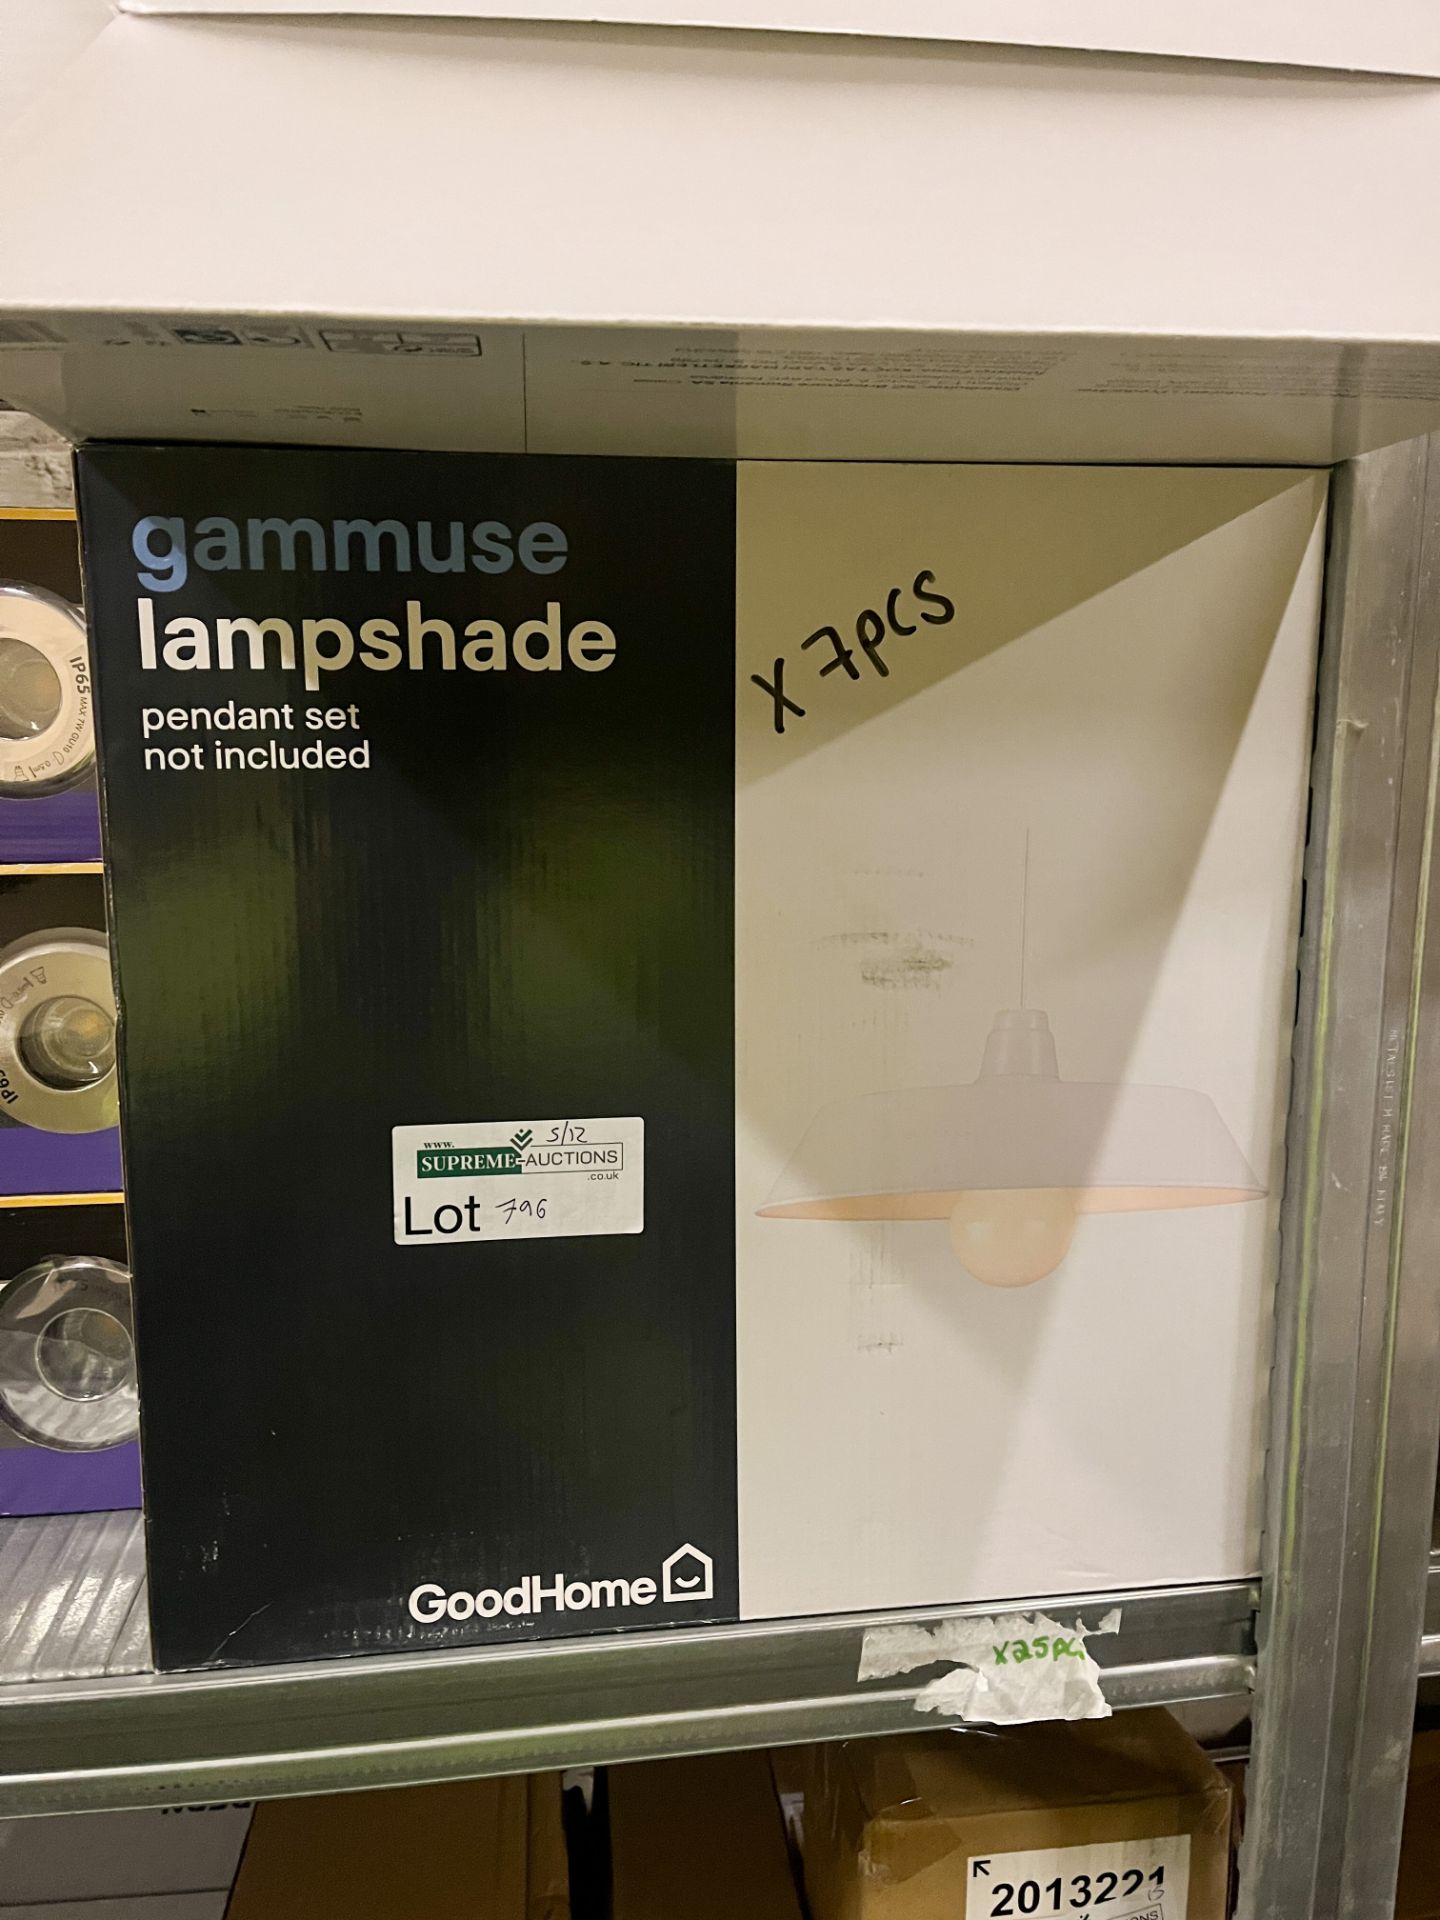 7x BRAND NEW GOODHOME GAMMUSE LAMPSHADES. (S2LW)